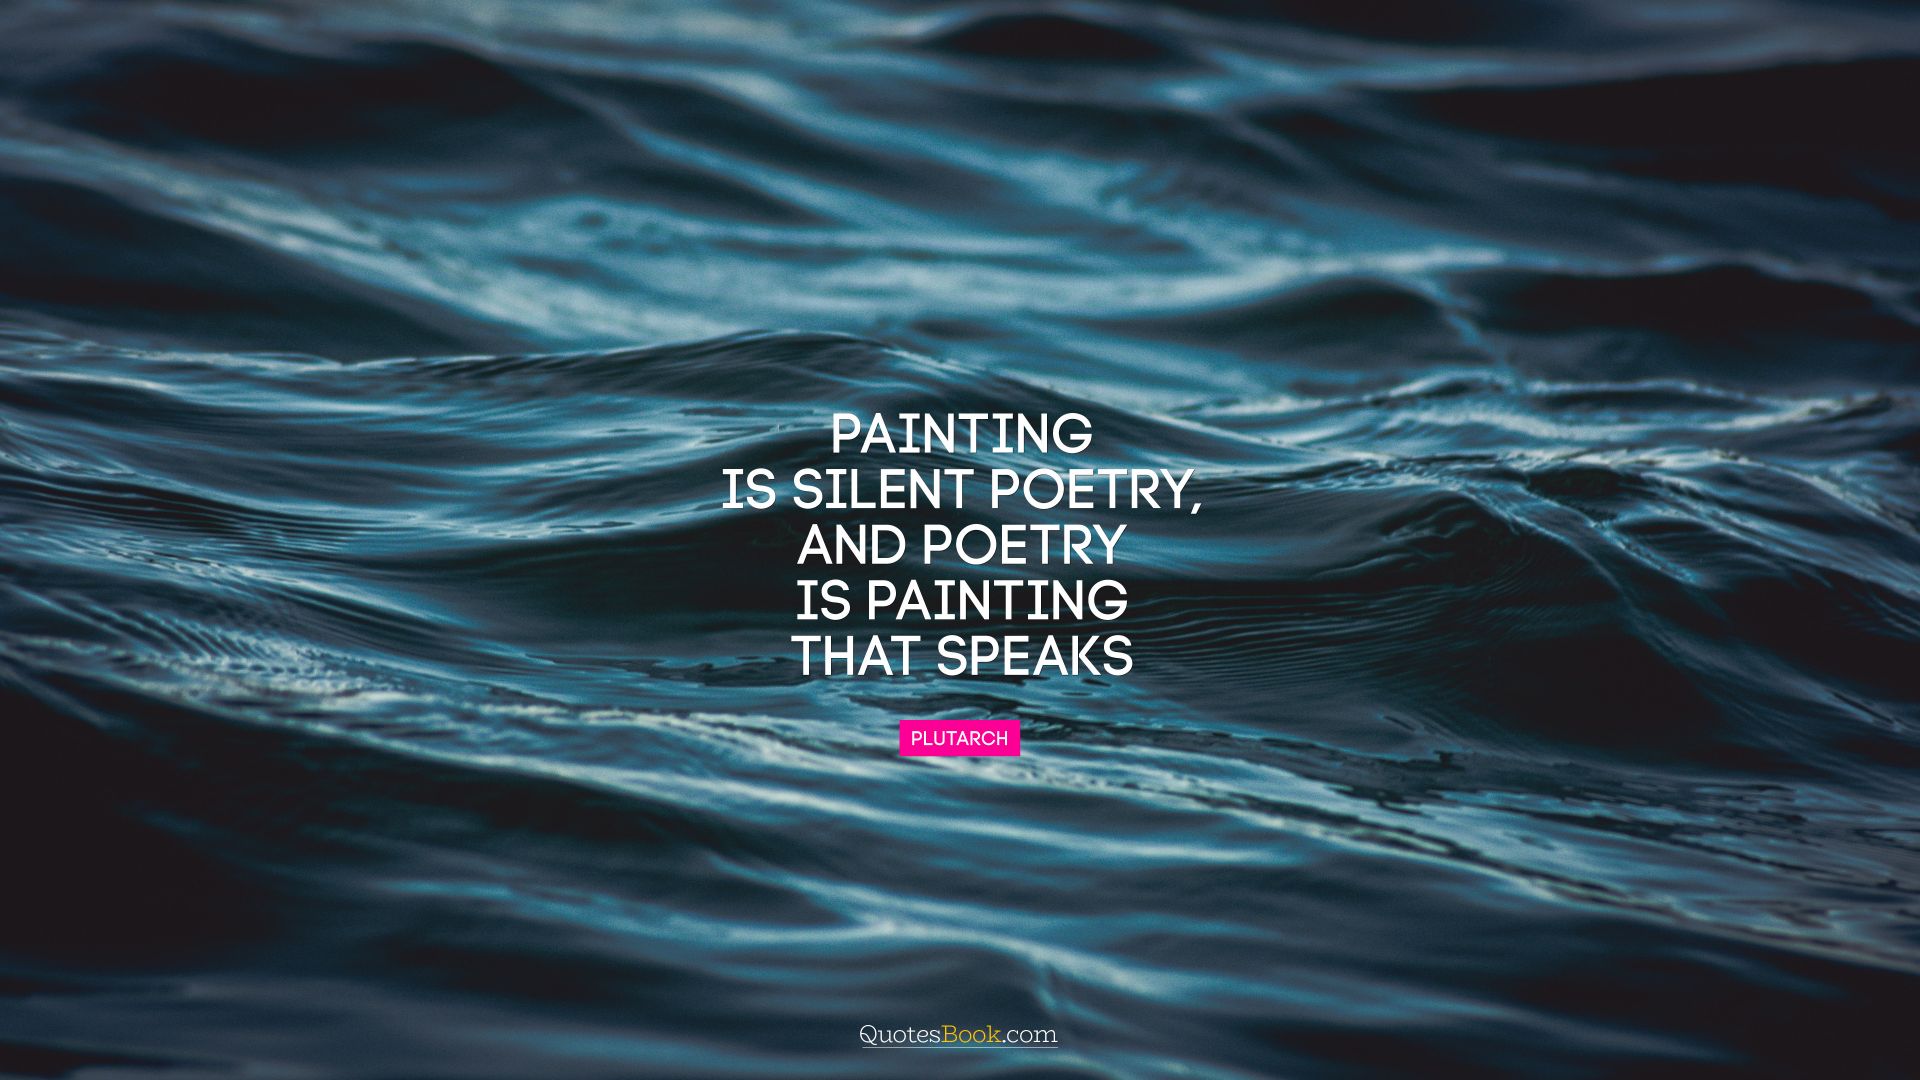 Painting is silent poetry, and poetry is painting that speaks. - Quote by Plutarch